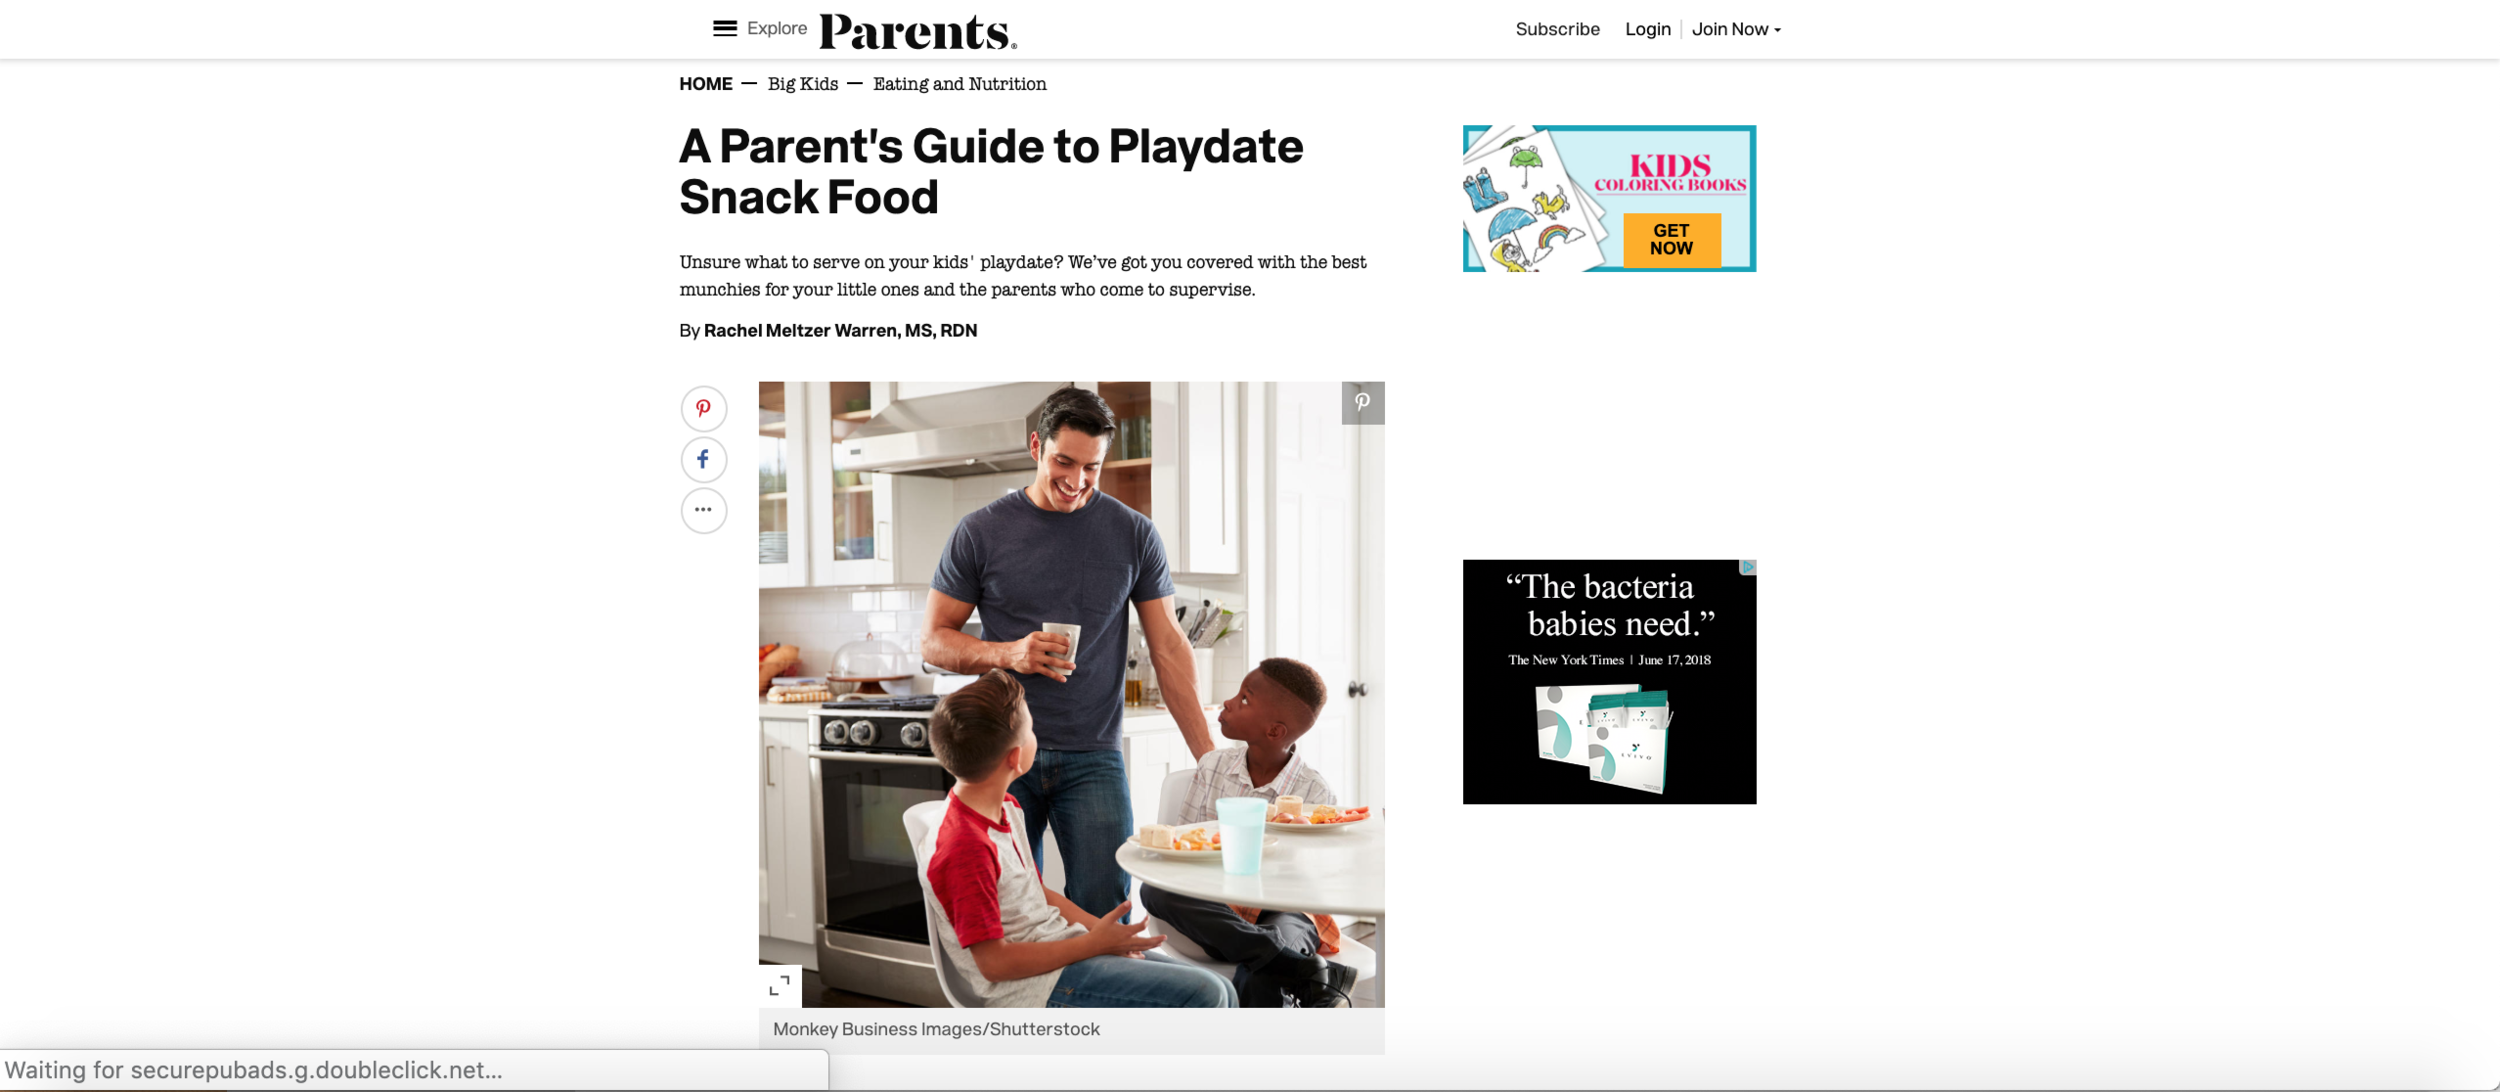 A Parent's Guide to Playdate Snack Food